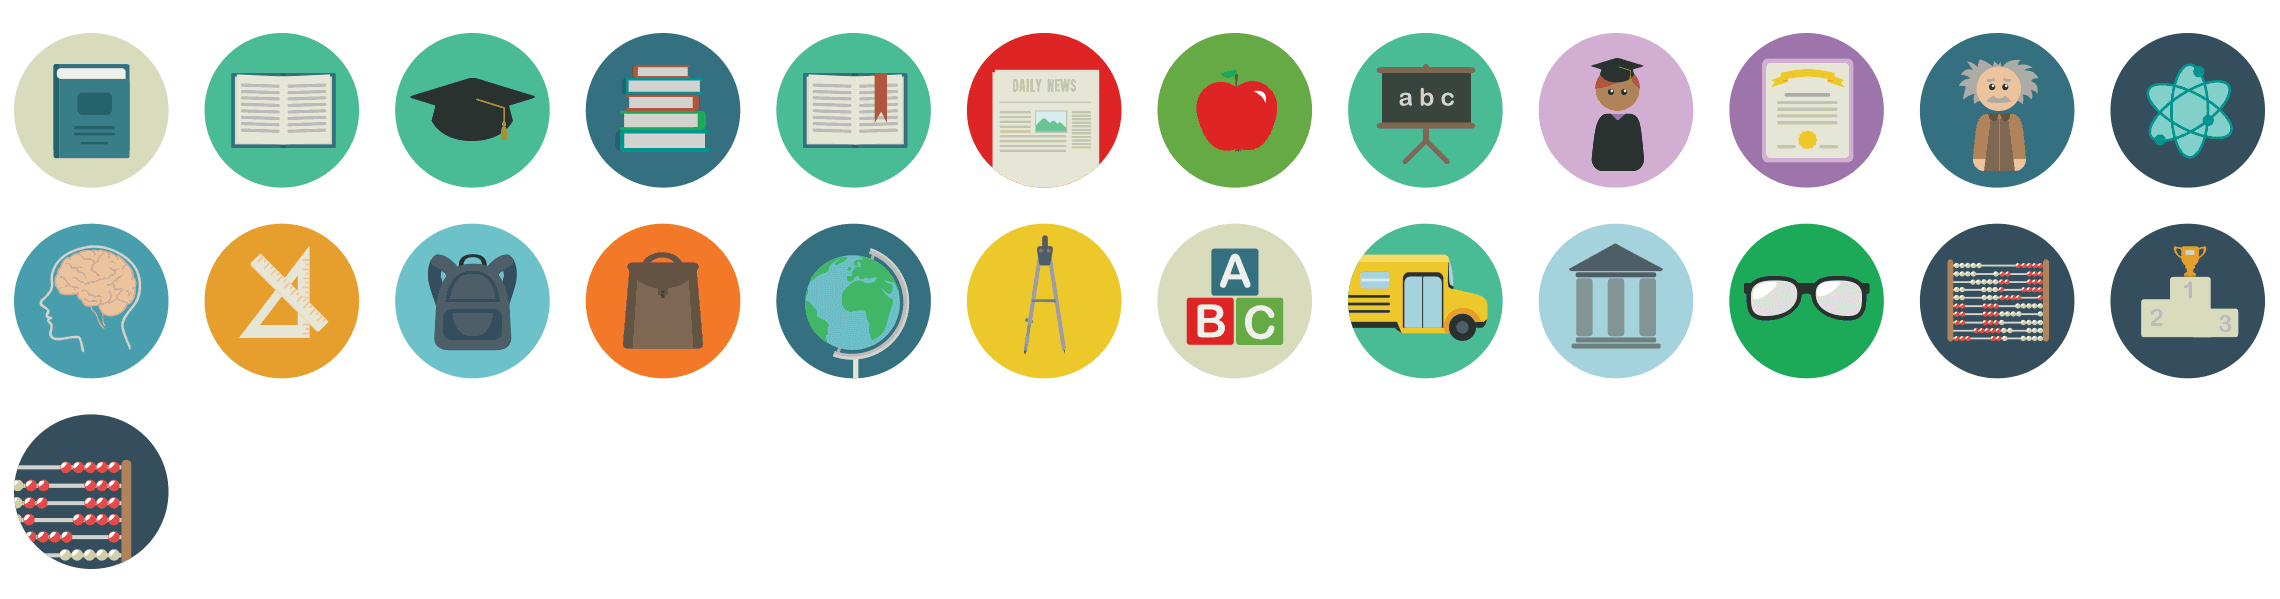 education-and-science-flat-icons-vol-1-preview